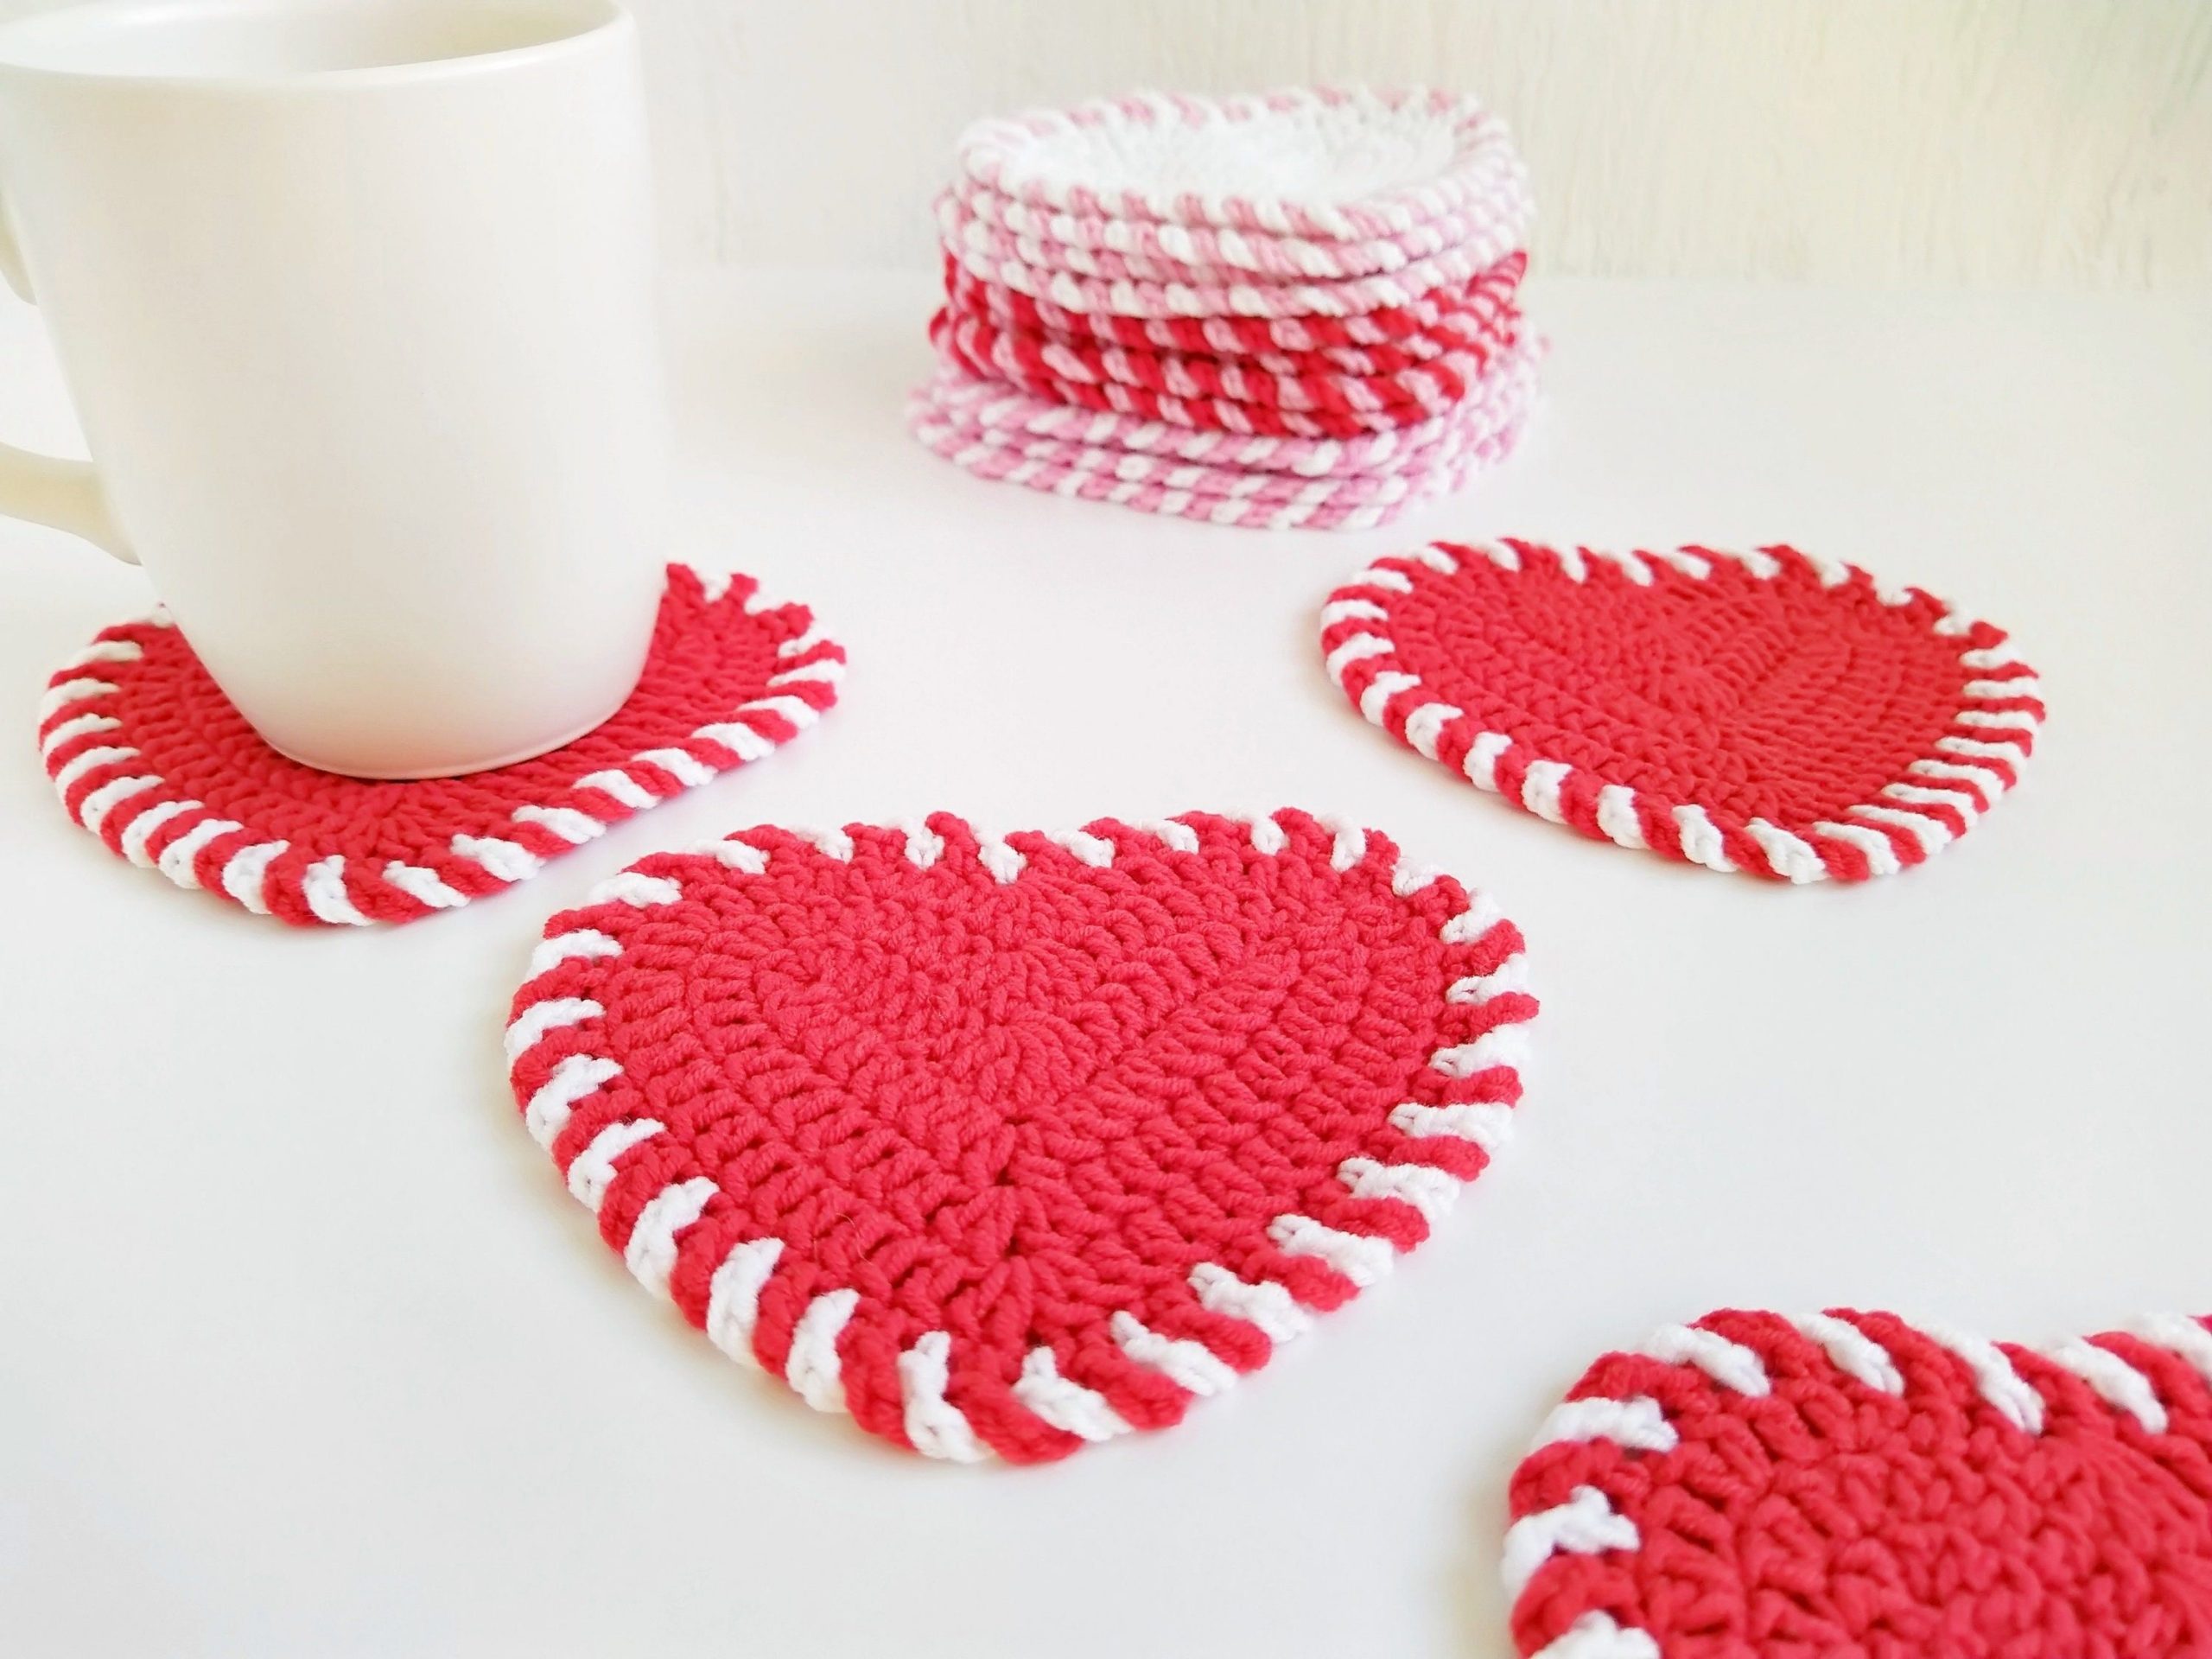 DIY crochet coaster for Mother's Day